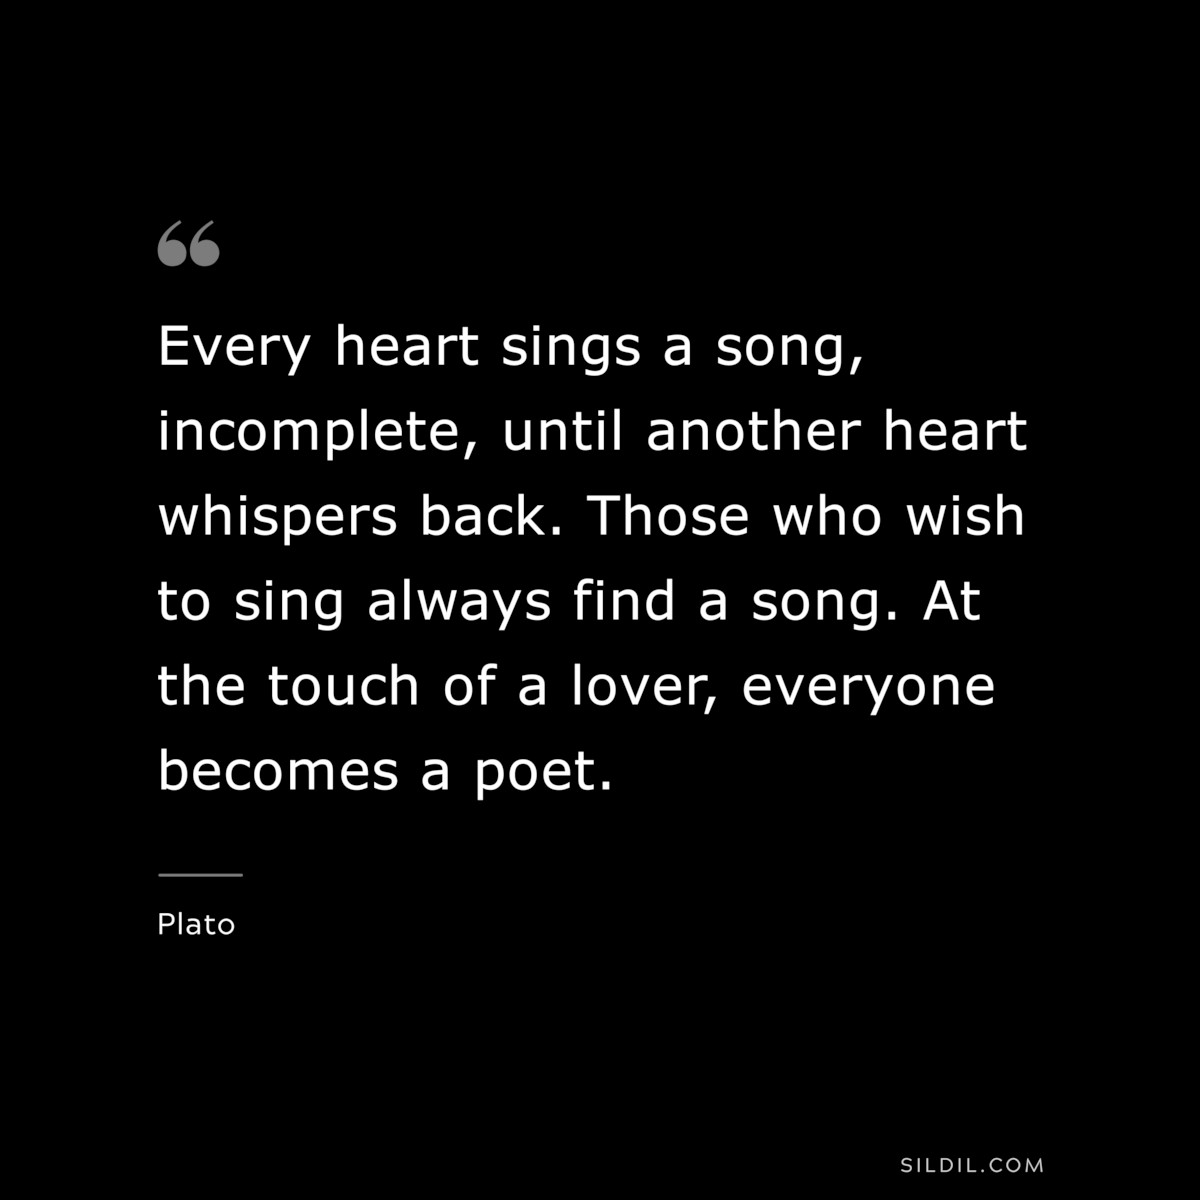 Every heart sings a song, incomplete, until another heart whispers back. Those who wish to sing always find a song. At the touch of a lover, everyone becomes a poet. ― Plato